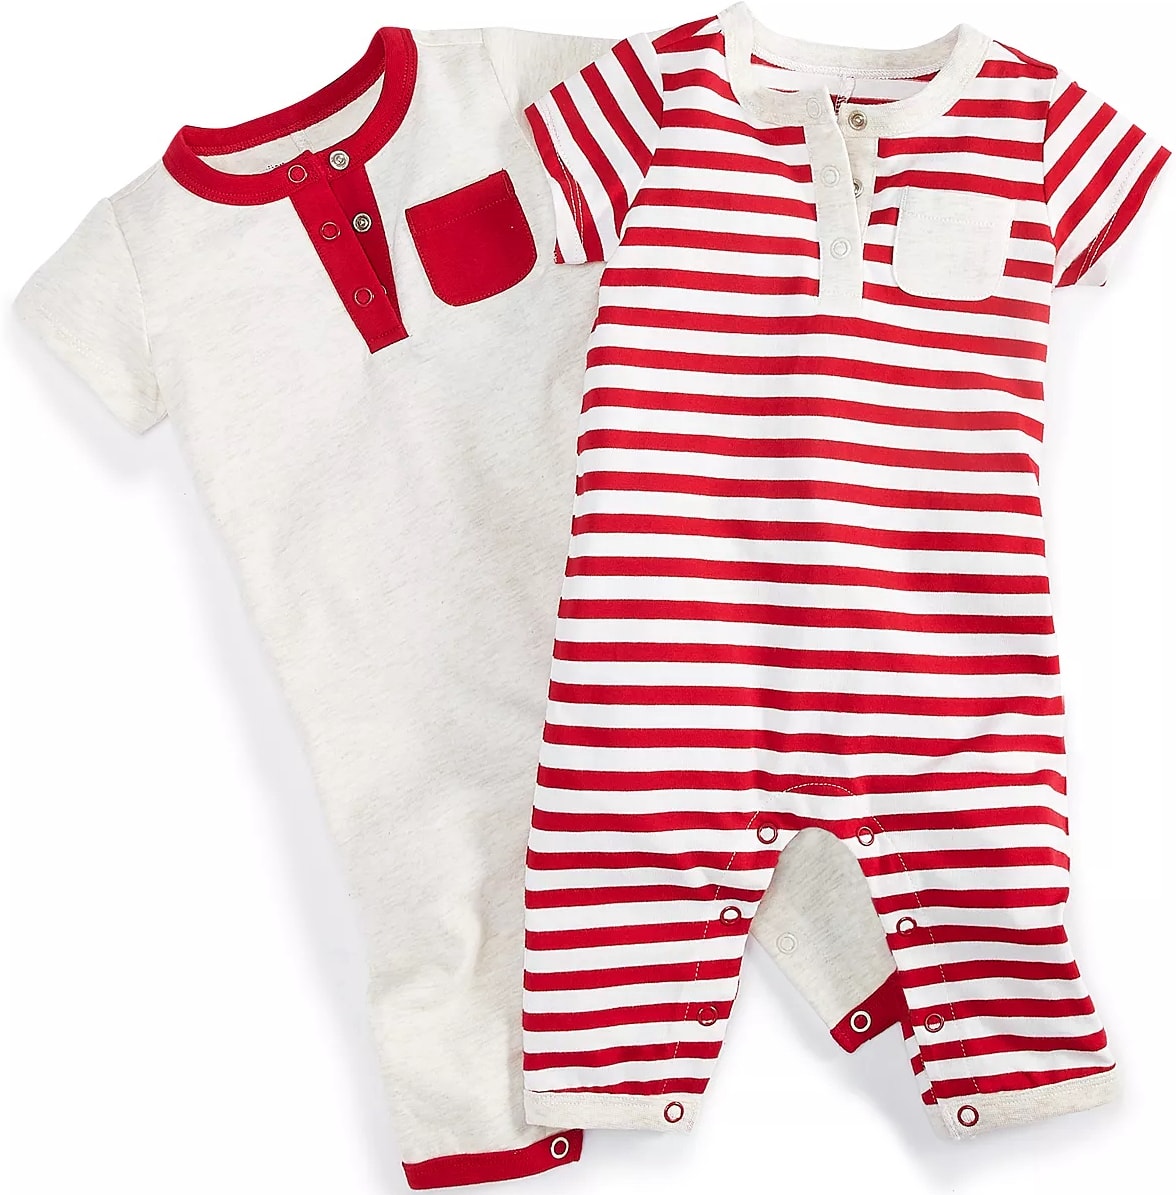 Red and white onesies 